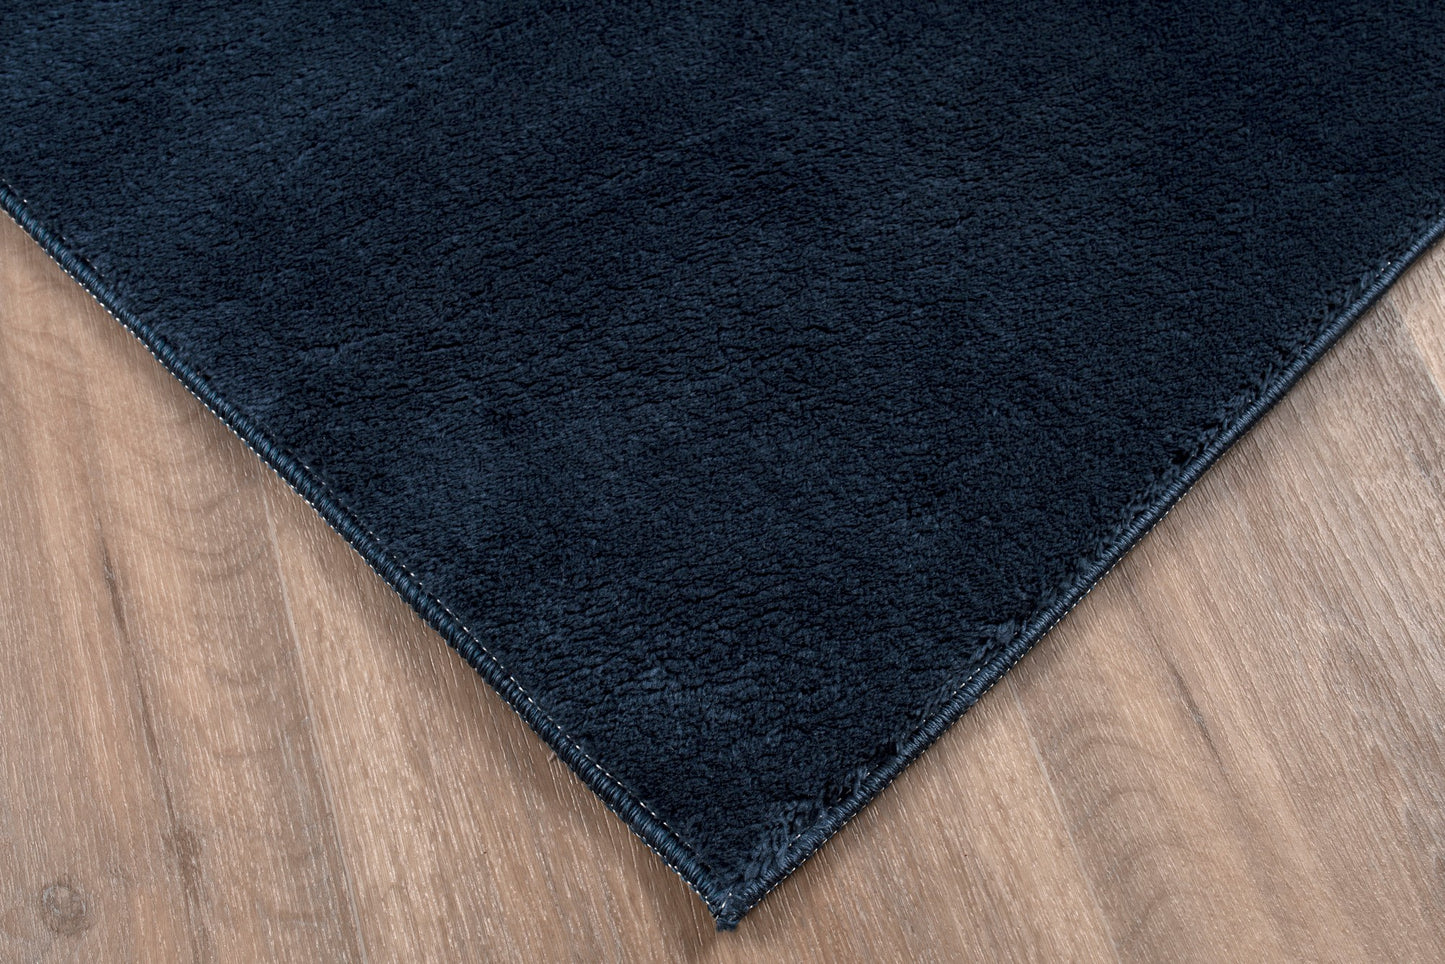 navy blue fluffy soft machine washable area rug for living room bedroom 4x6, 4x5 ft Small Carpet, Home Office, Living Room, Bedroom